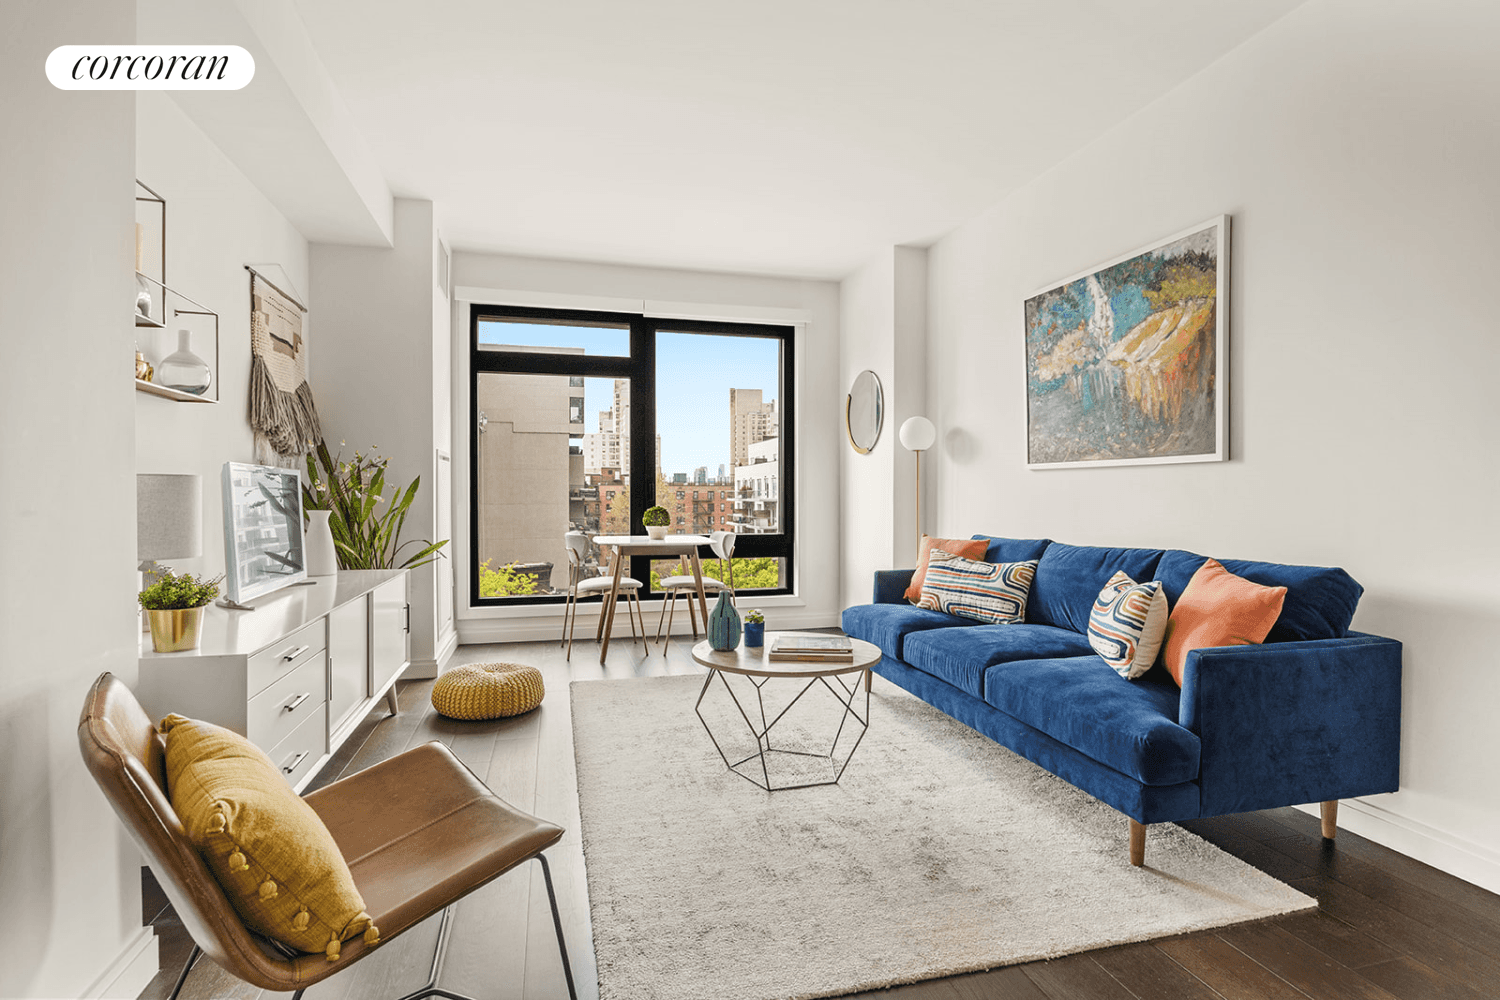 Unit 5C at 613 Baltic Street is a wonderfully appointed two bedroom, two bath condo with a split bedroom layout, spacious living room and western views for miles all in ...